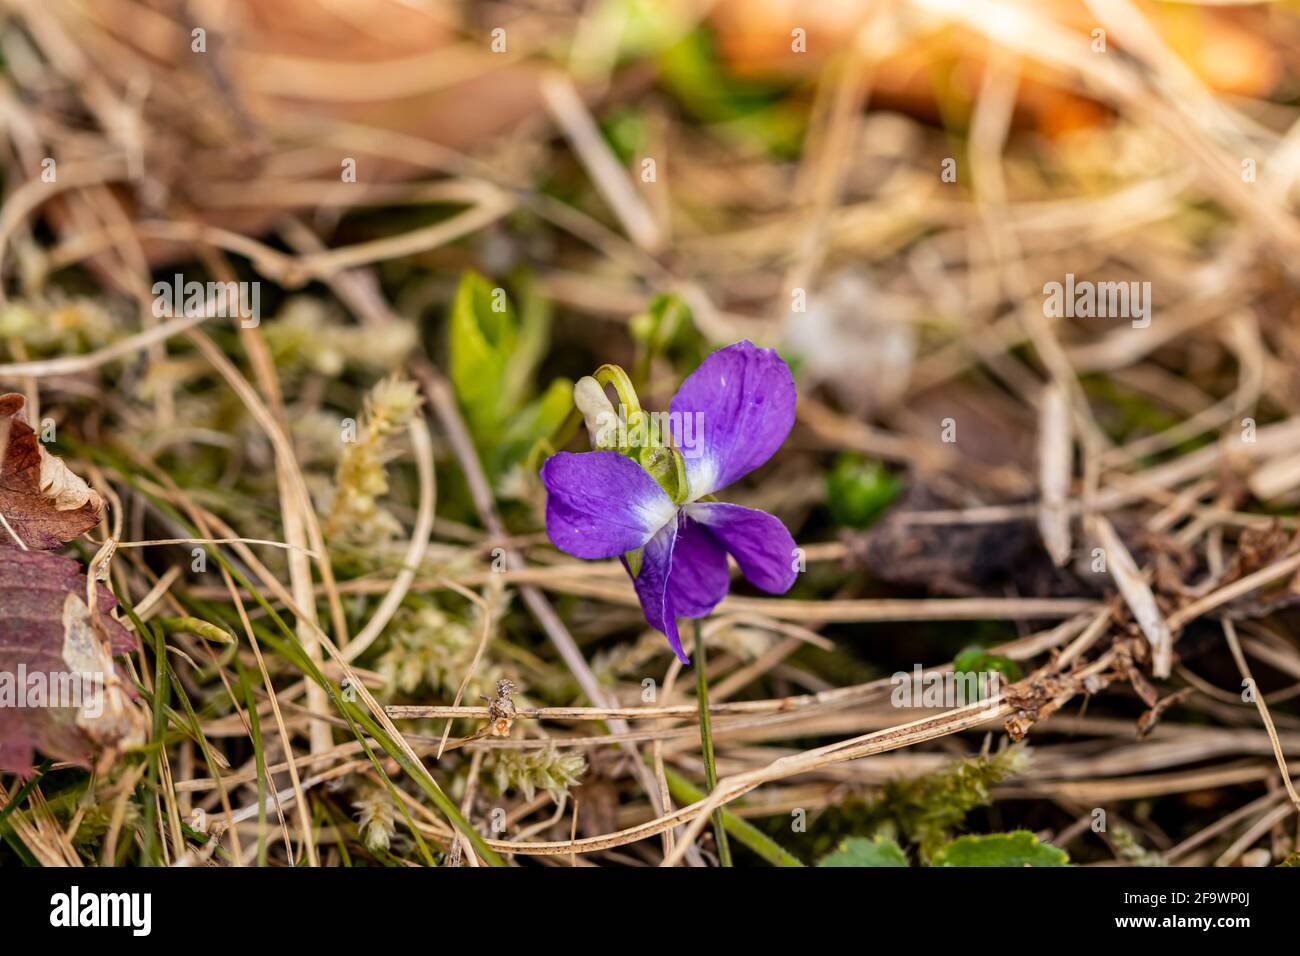 Hairy violet flower in the forest Stock Photo